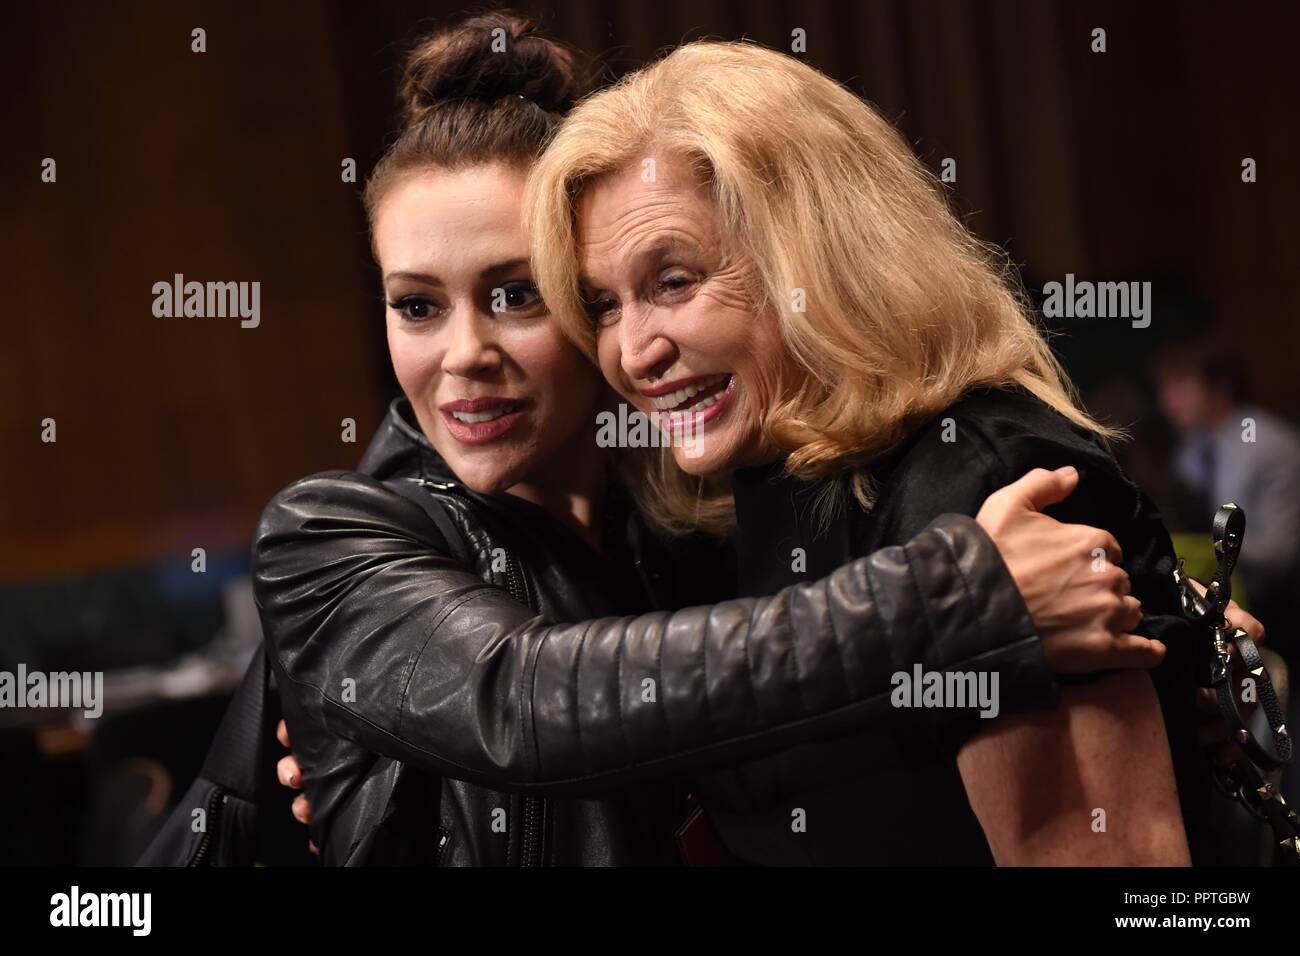 UNITED STATES - SEPTEMBER 27: Actress Alyssa Milano, left, hugs Rep. Carolyn Maloney, D-N.Y., in the hearing room before the start of Dr. Christine Blasey Ford's appearance in the Senate Judiciary Committee to testify on the nomination of Brett M. Kavanaugh to be an associate justice of the Supreme Court of the United States. (Photo By Tom Williams/CQ Roll Call) | usage worldwide Stock Photo